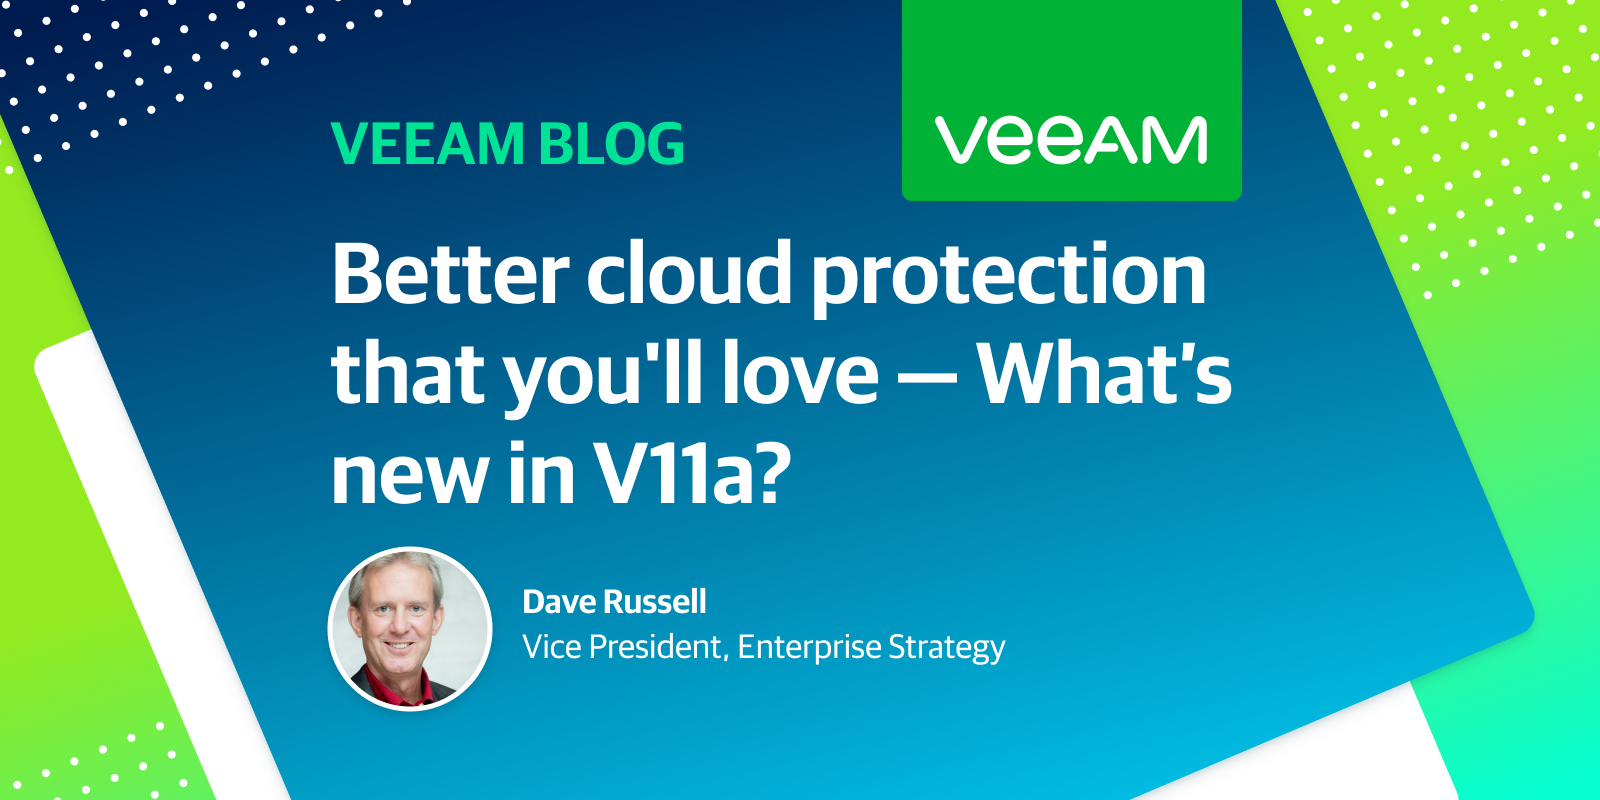 Better cloud protection that you’ll love – No relevant questions asked